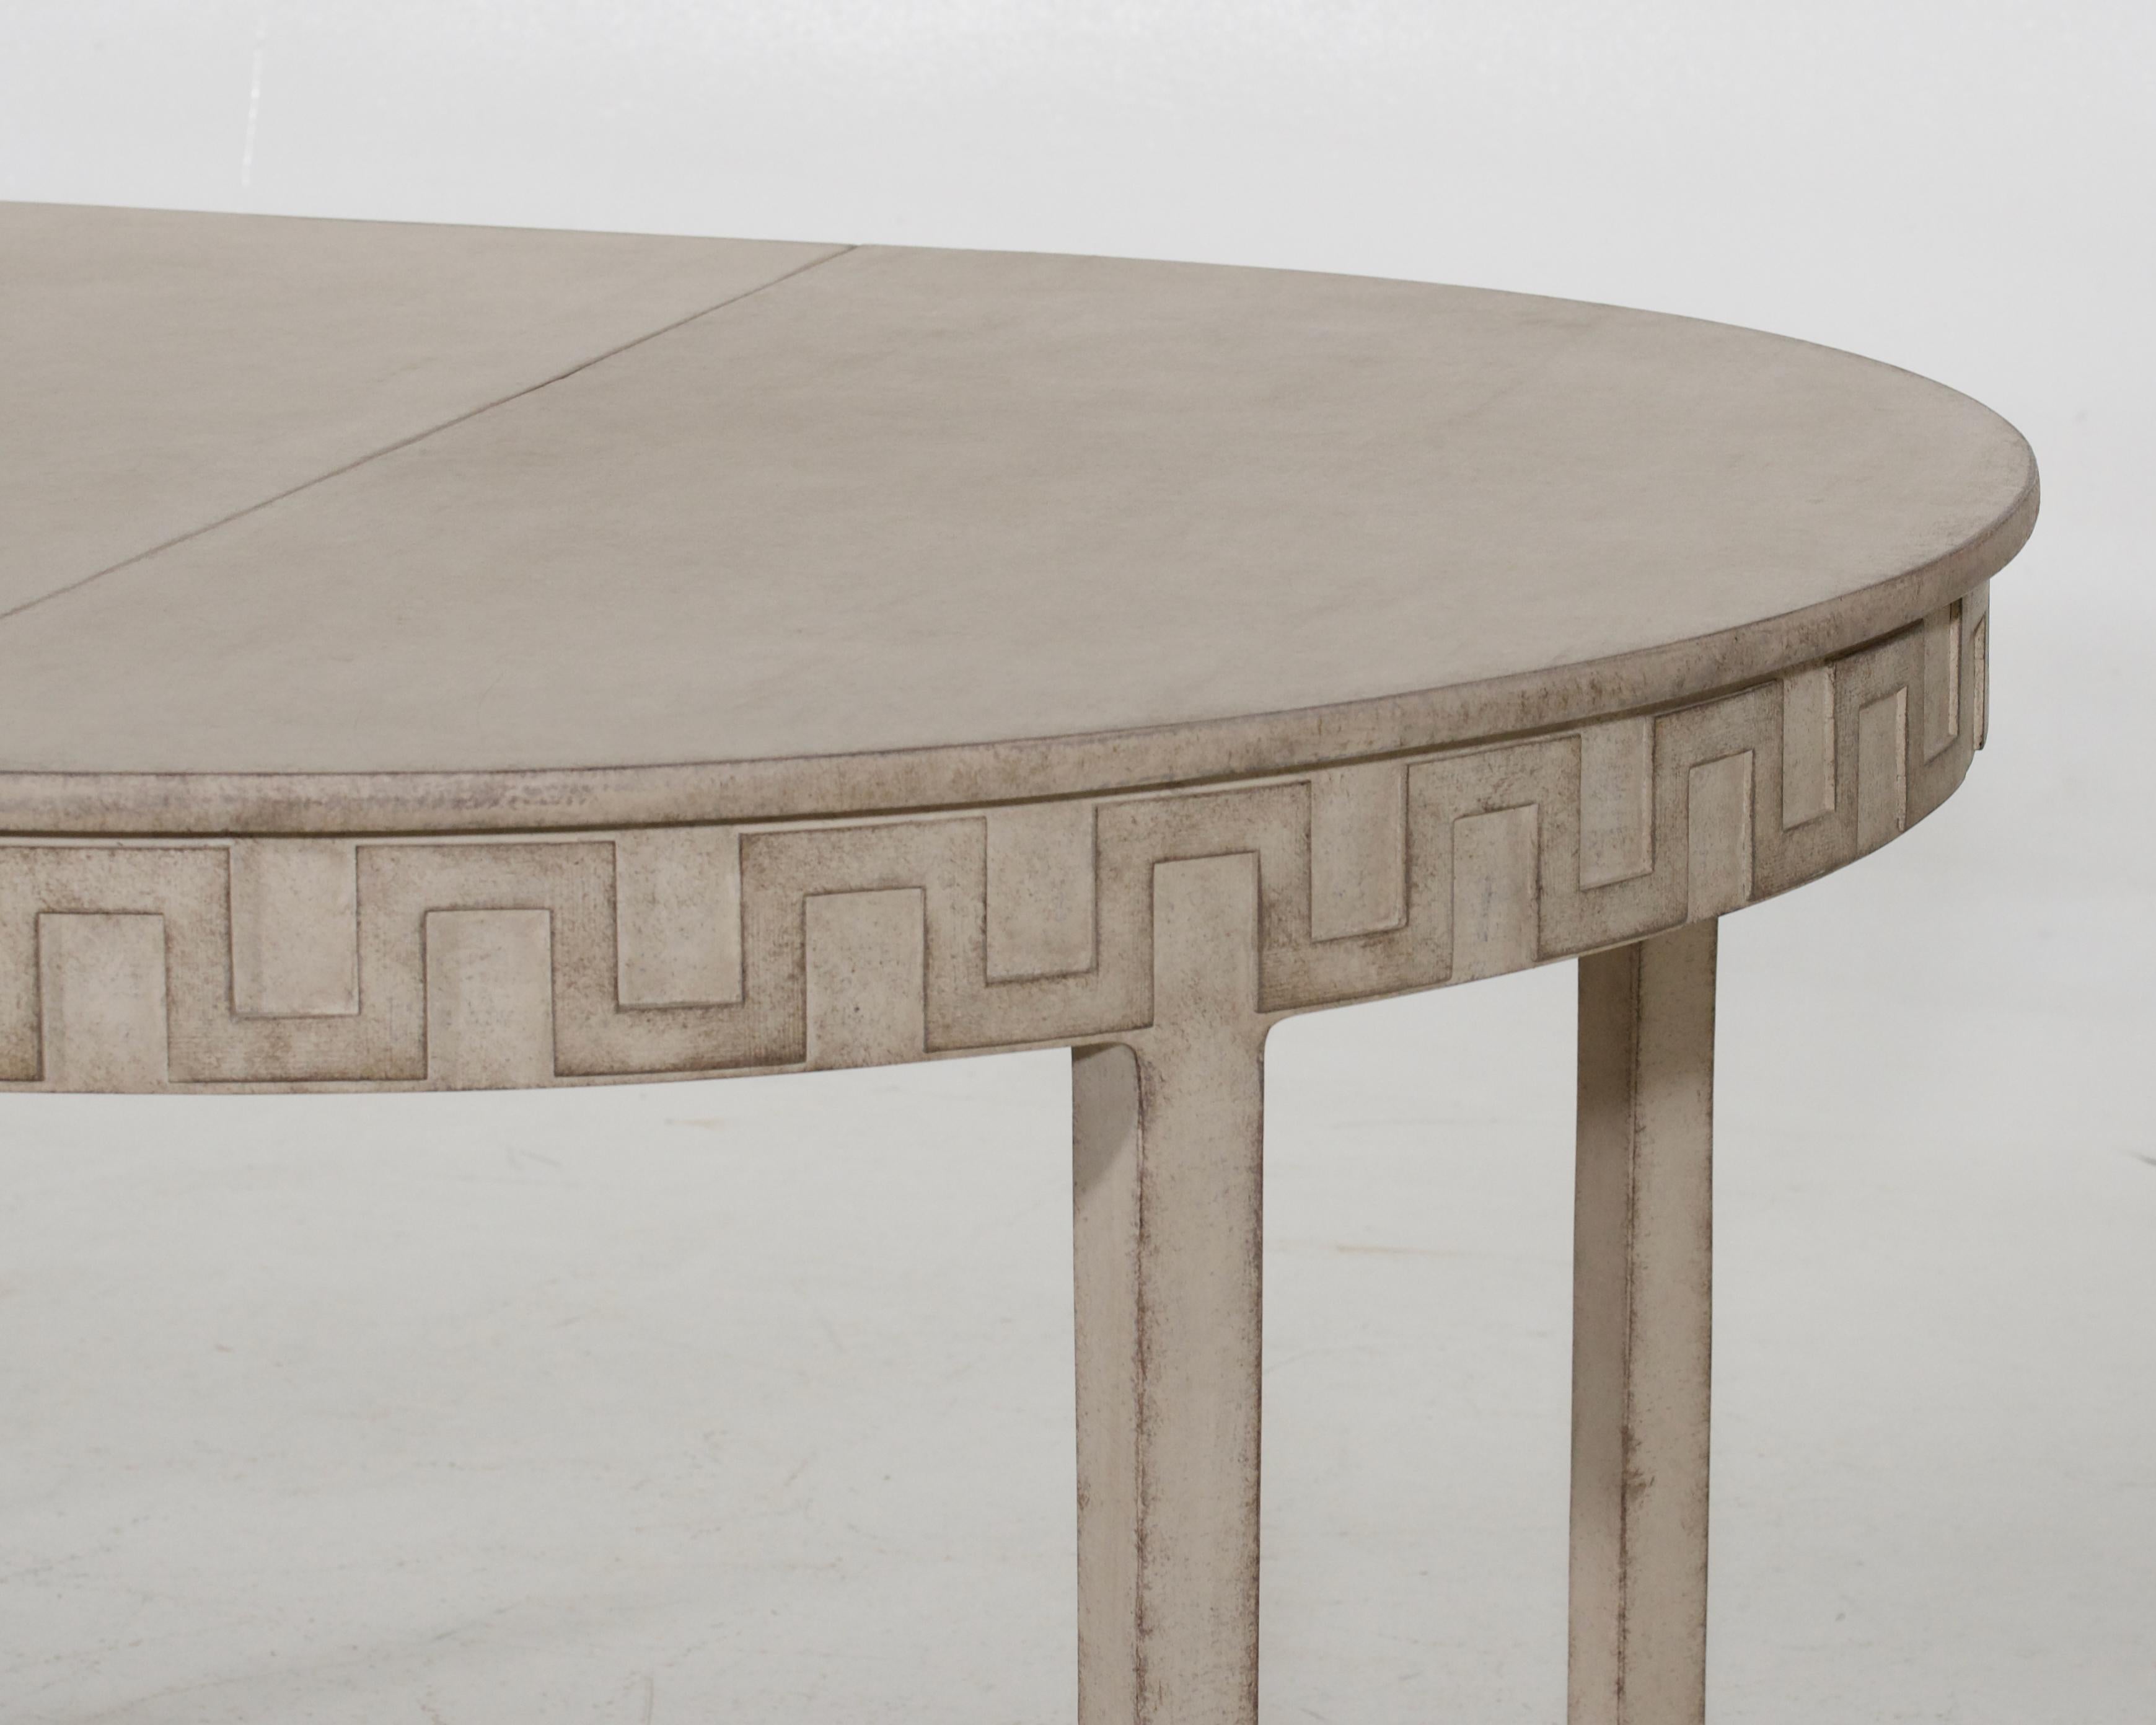 A Swedish extension dining table from the 19th century with carved Greek Key frieze, three leaves and cream / off white painted finish. Discover the epitome of elegance and versatility in this stunning Swedish extension dining table from the 19th